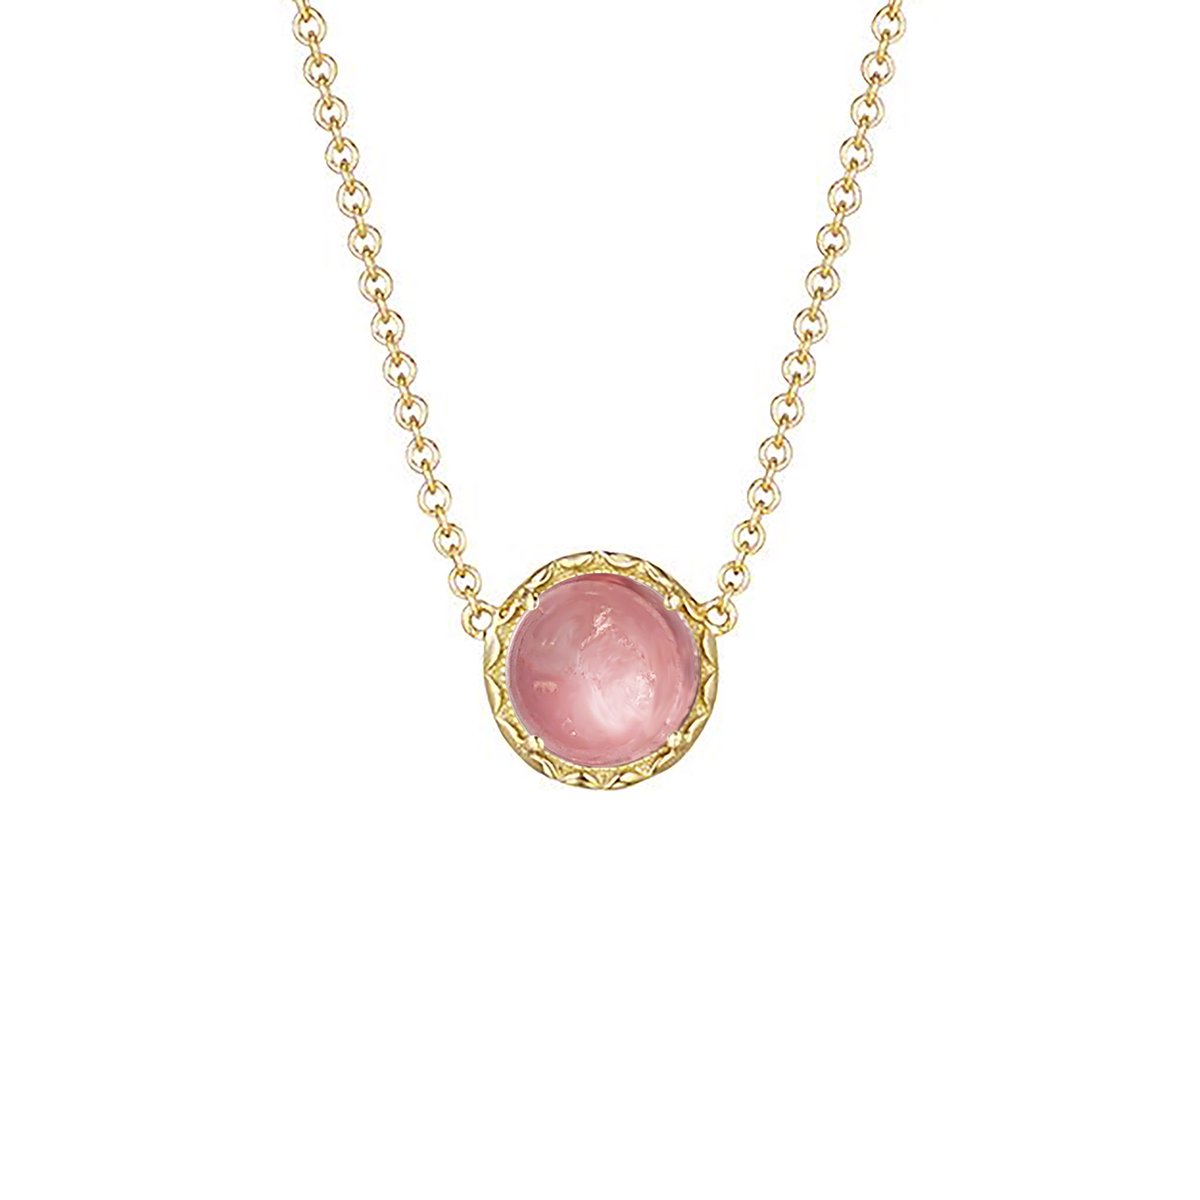 This pendant feels like it come out from a renaissance period. Simple design mixed with millgrains to create a vintage style pendant.

#Vintagejewelry, #millgrain, #pendant, #gemstonependant

bit.ly/30vSEO9 

W143 G053 SUZANNA MILLGRAIN GEMSTONE PENDANT - PINK ROUND